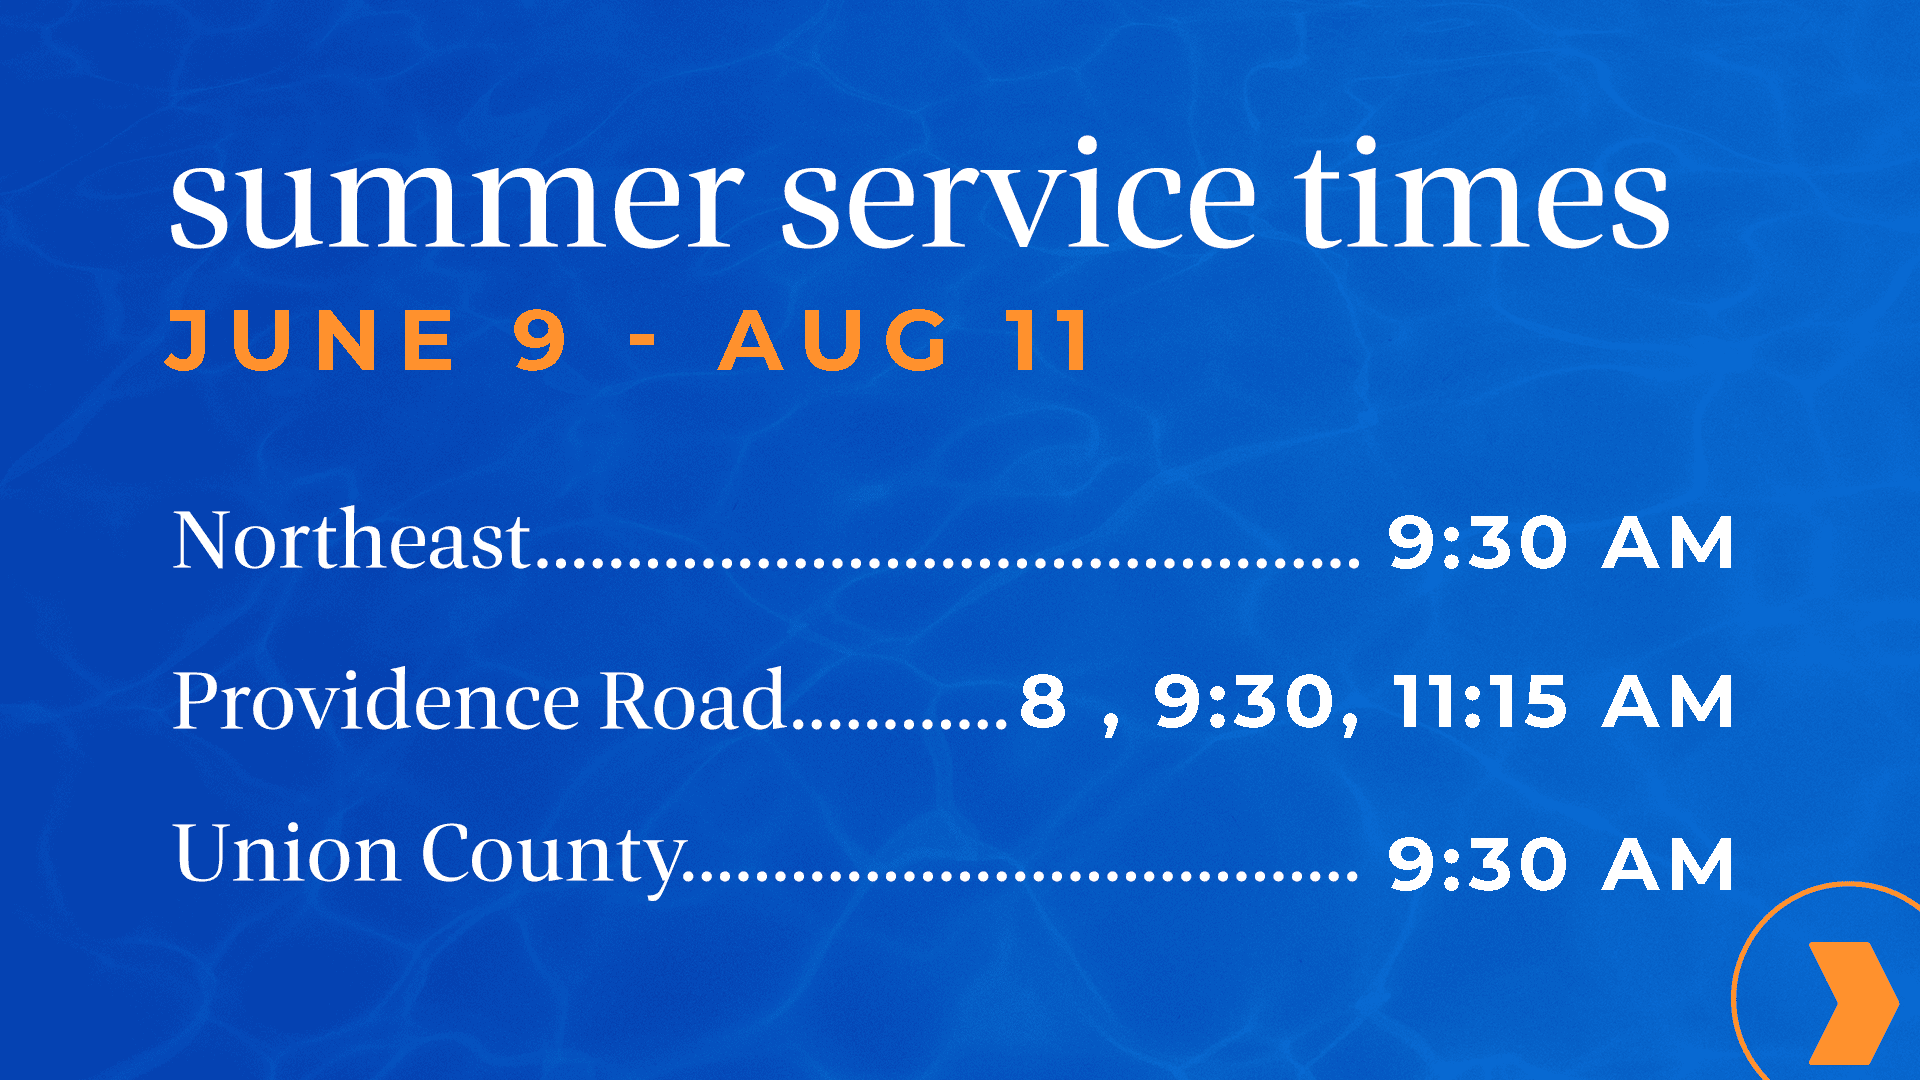 Summer Service Times - Summer Service Times at Northeast and Union County Campuses